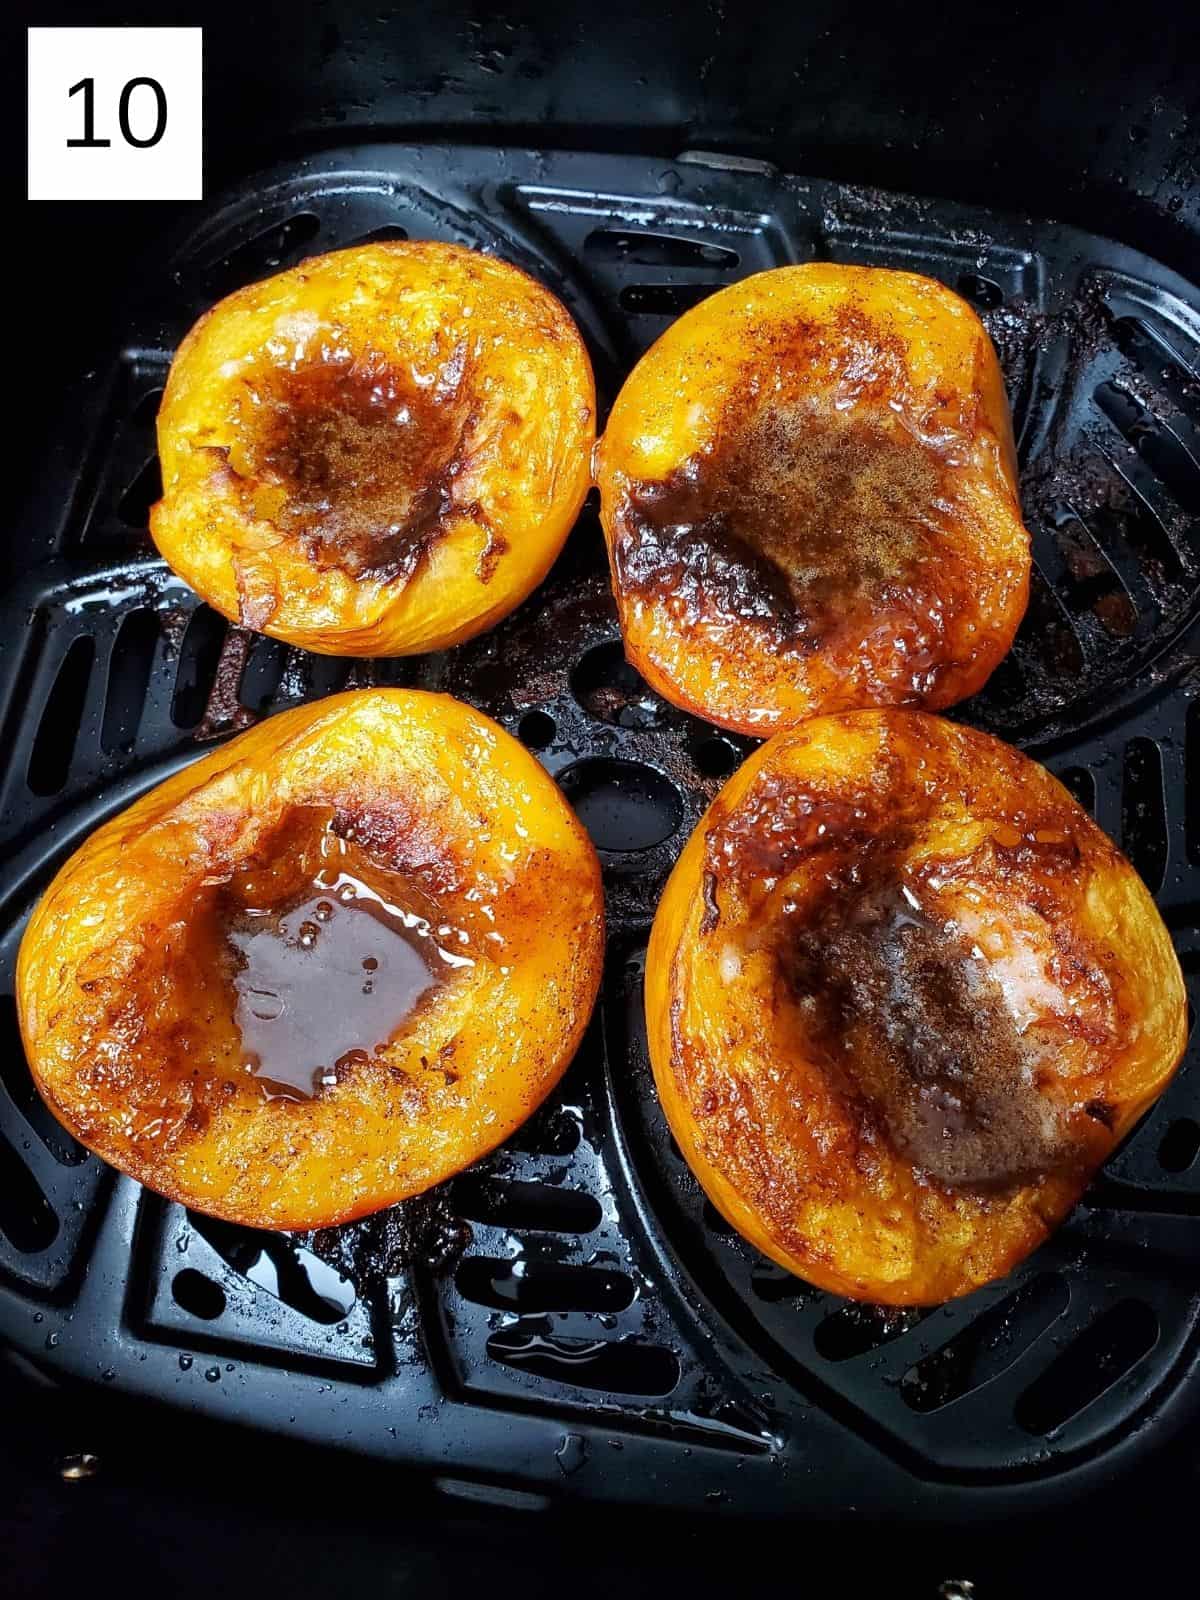 cooked four halves of peaches in an air fryer with spiced butter mixture